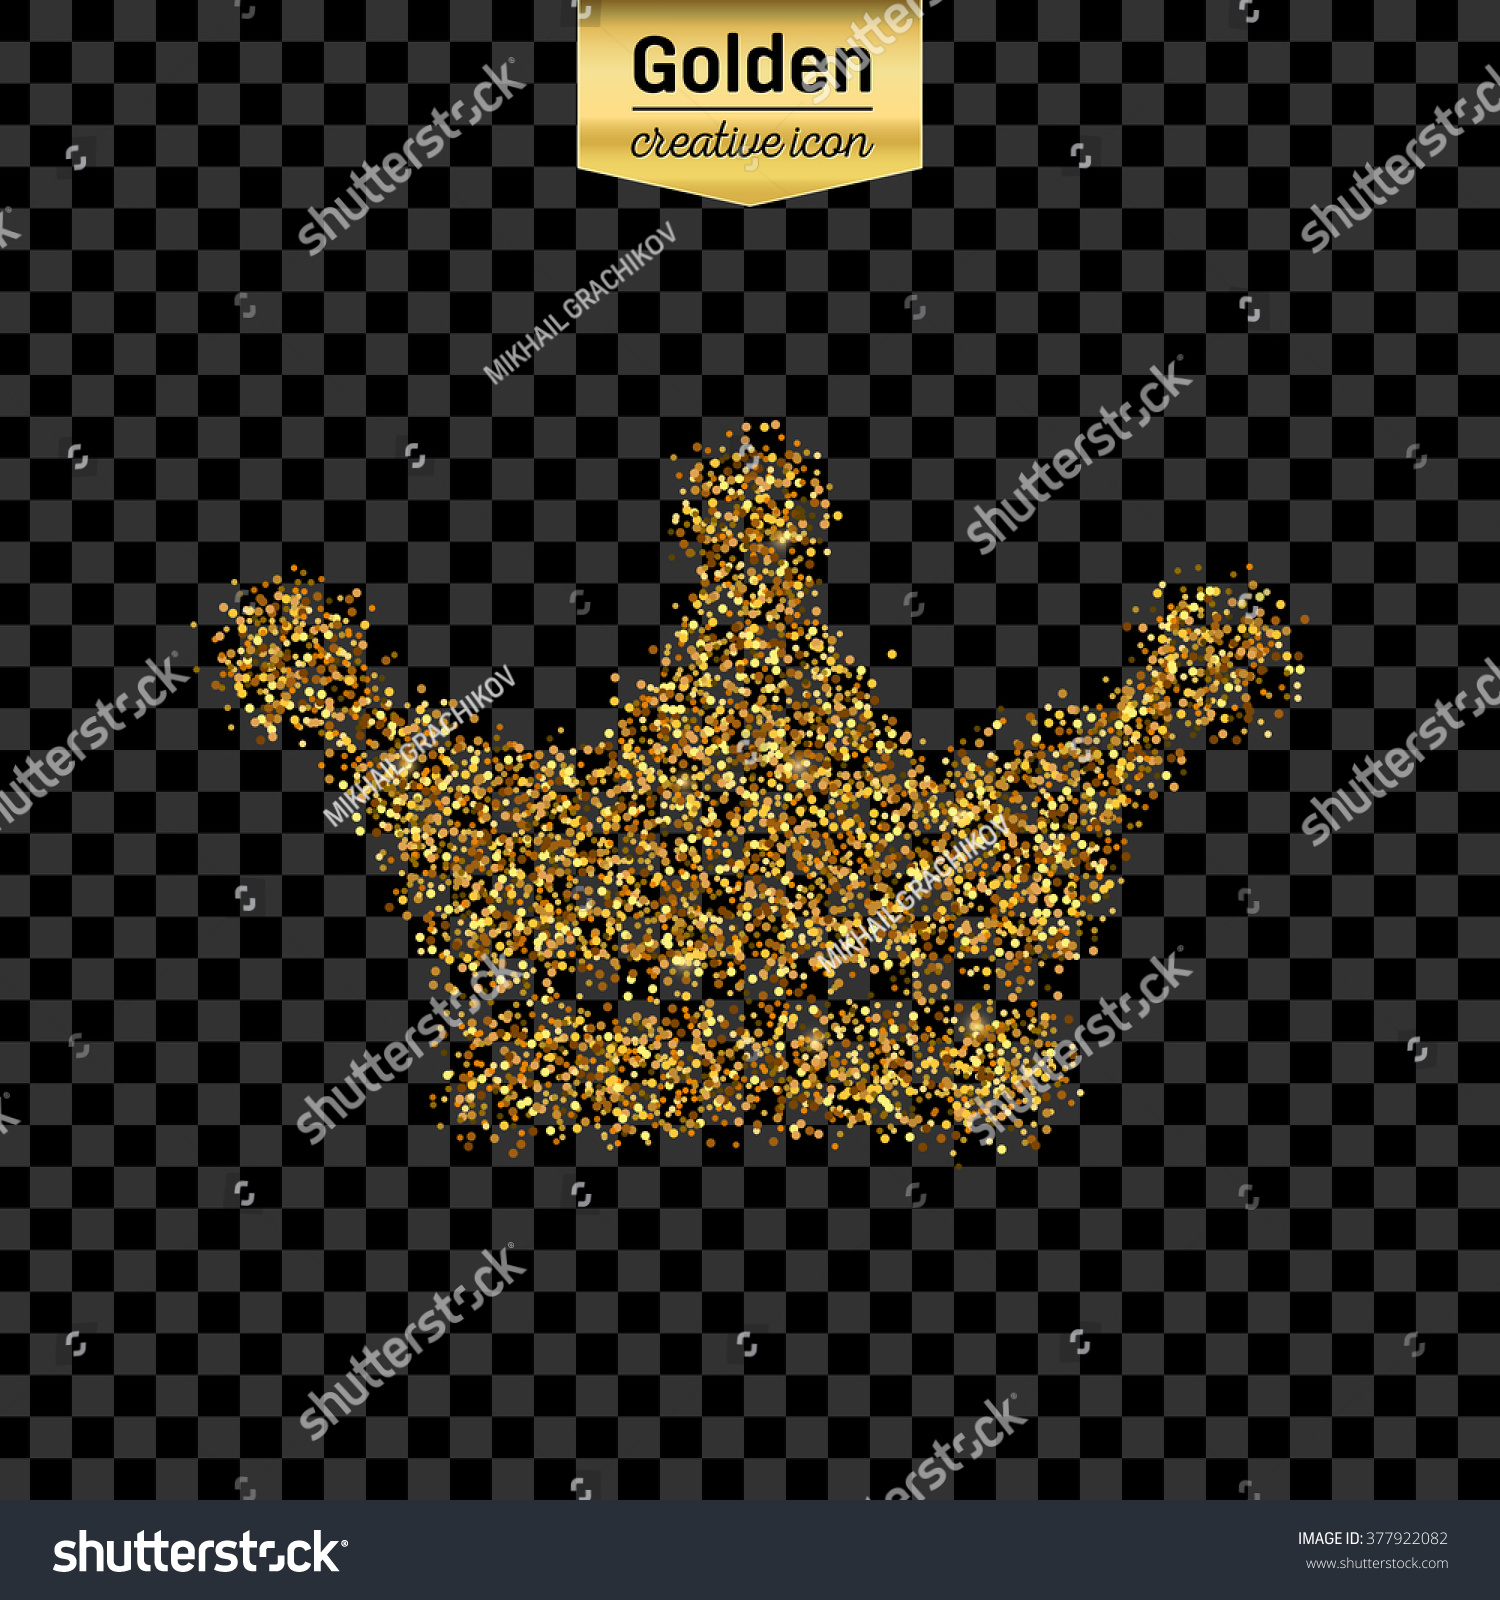 Gold Glitter Vector Icon Crown Isolated Stock Vector ...